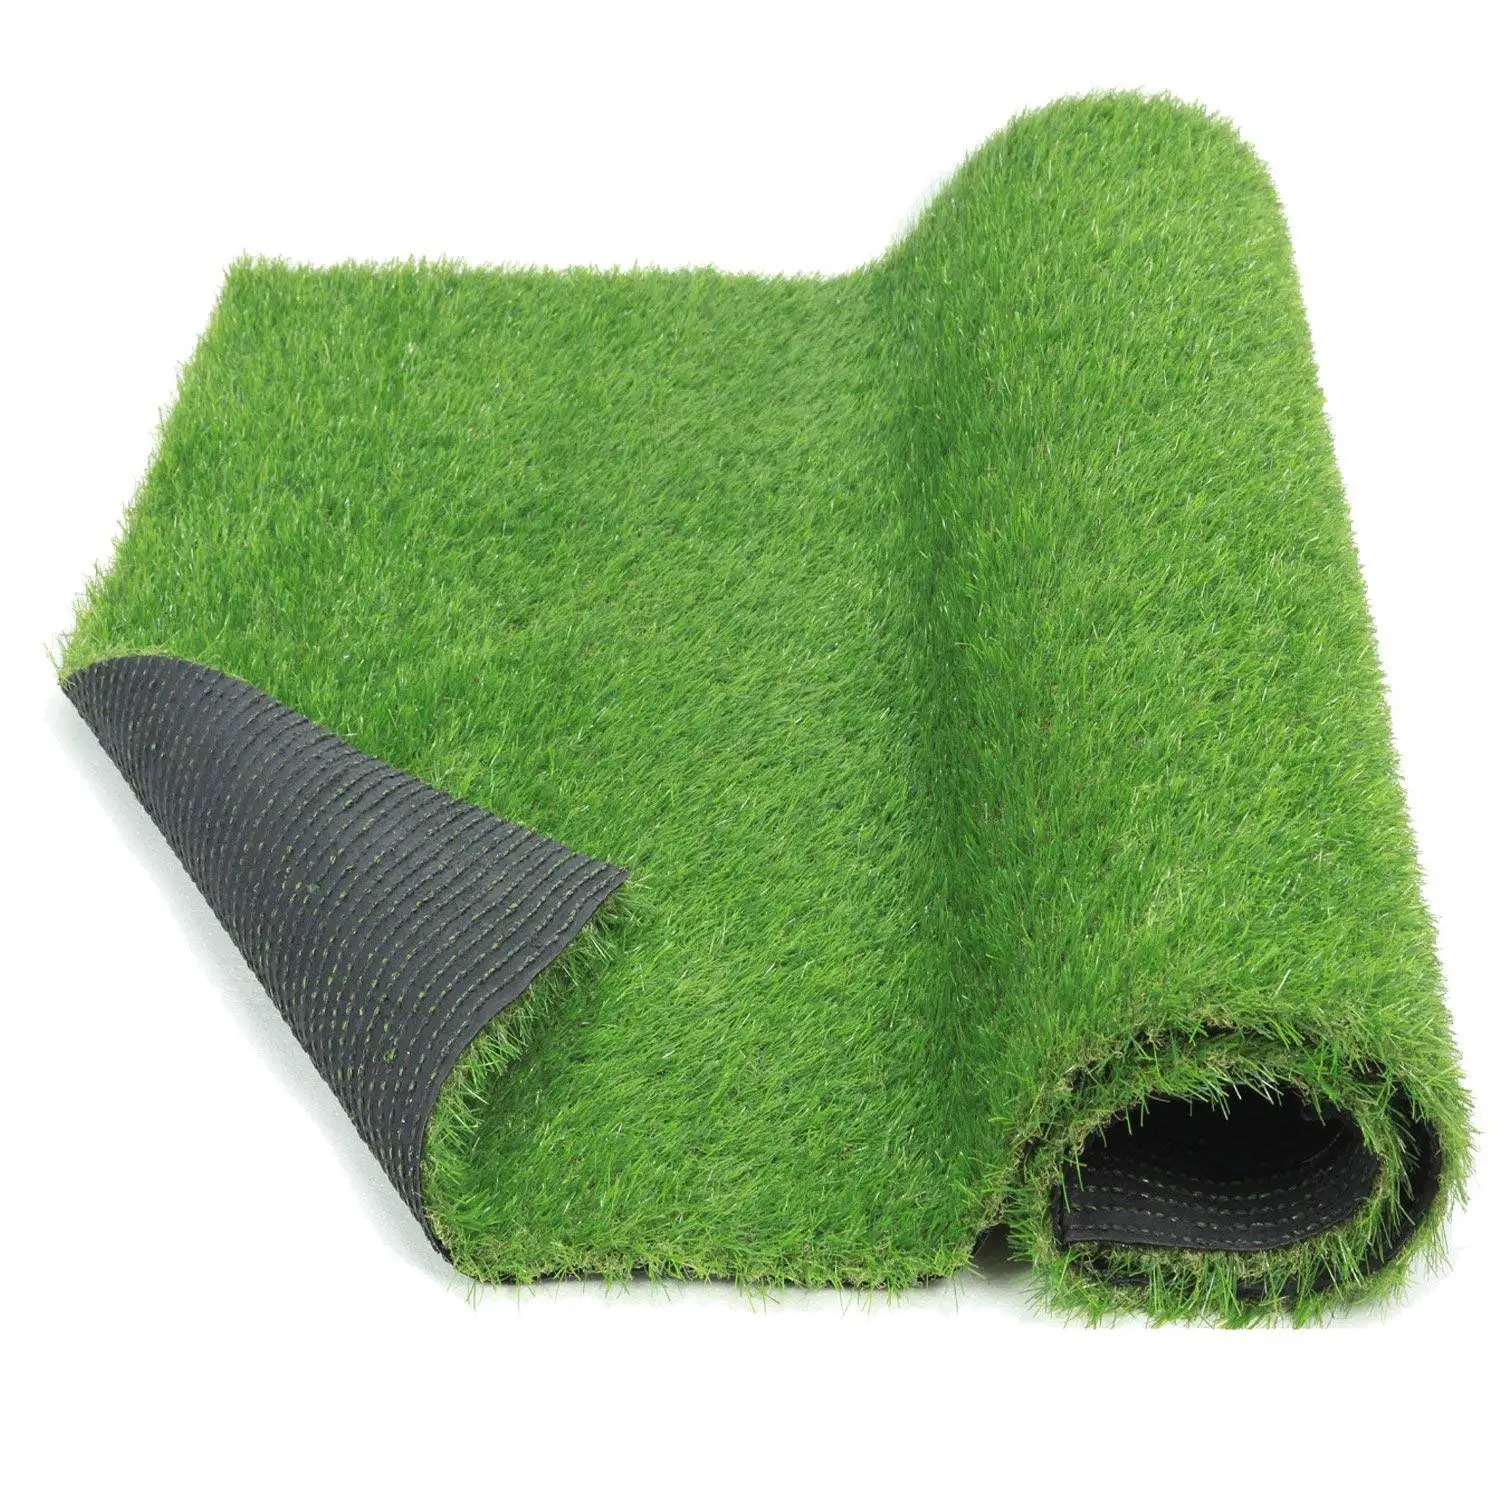 Cheap Turf Carpet Lowes, find Turf Carpet Lowes deals on ...